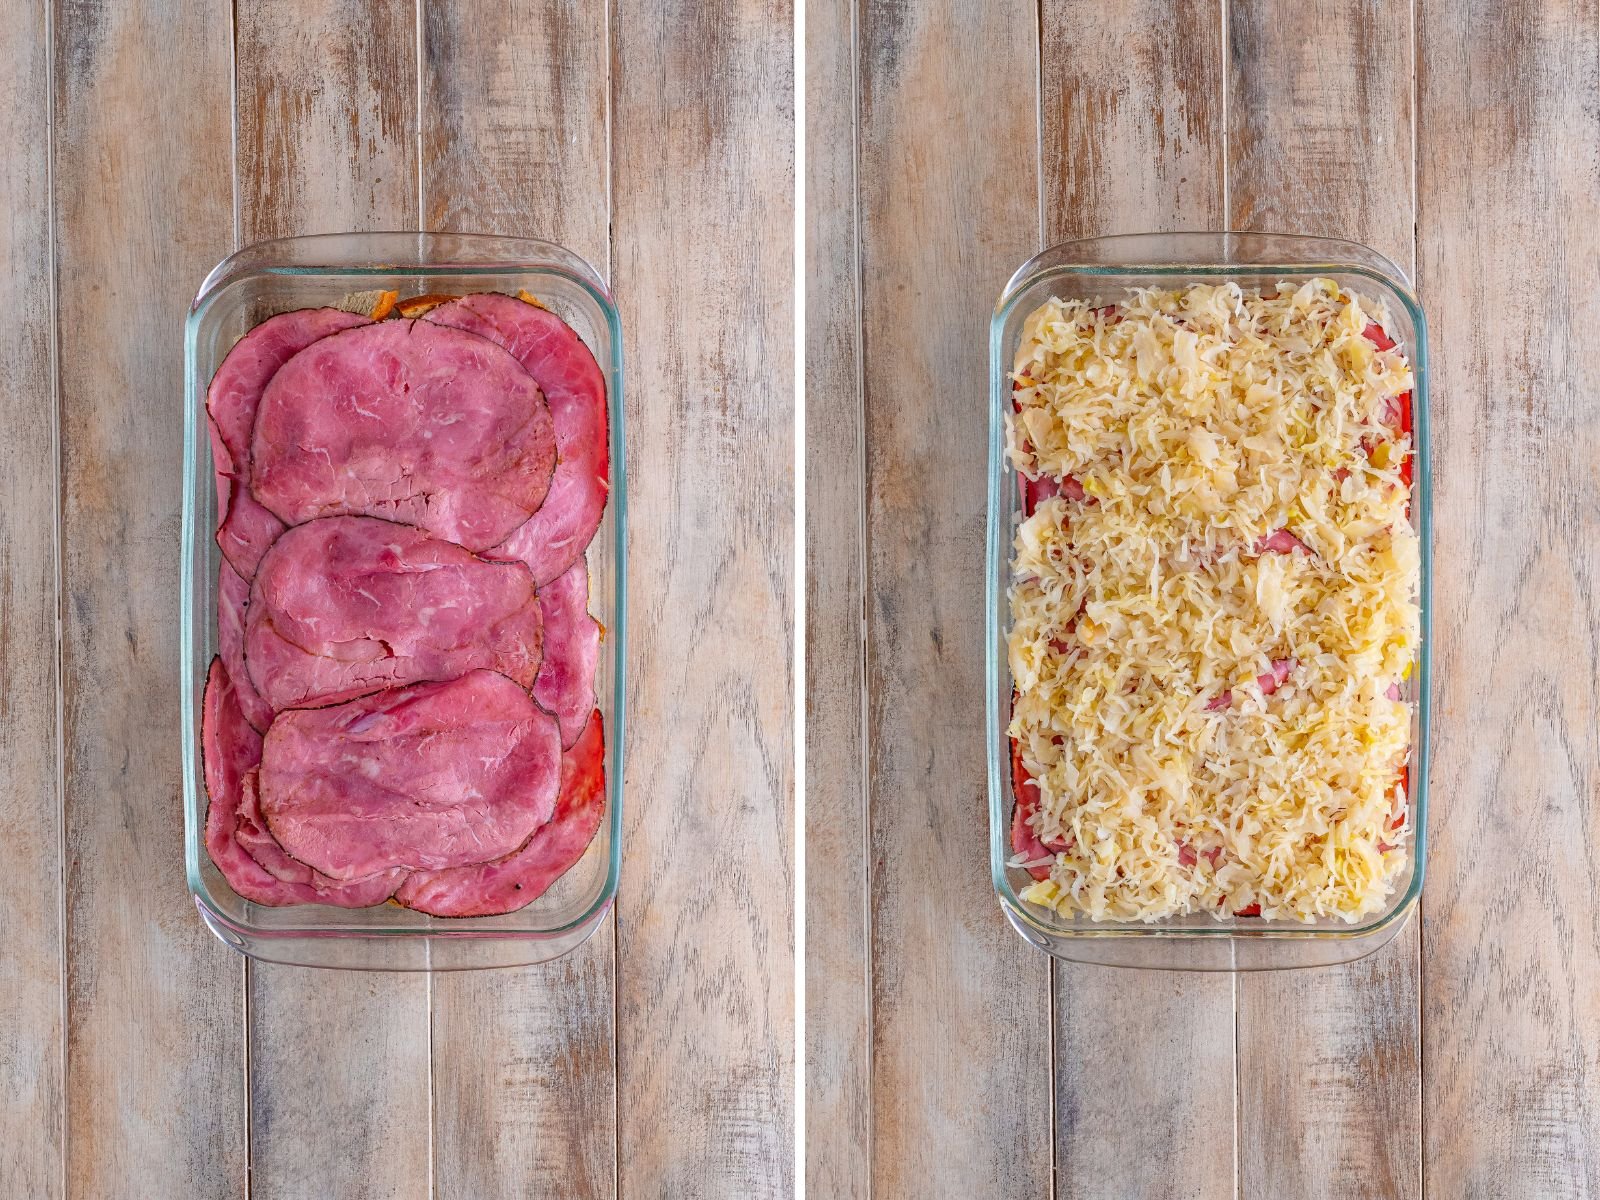 A collage of images with pastrami and layered sauerkraut.